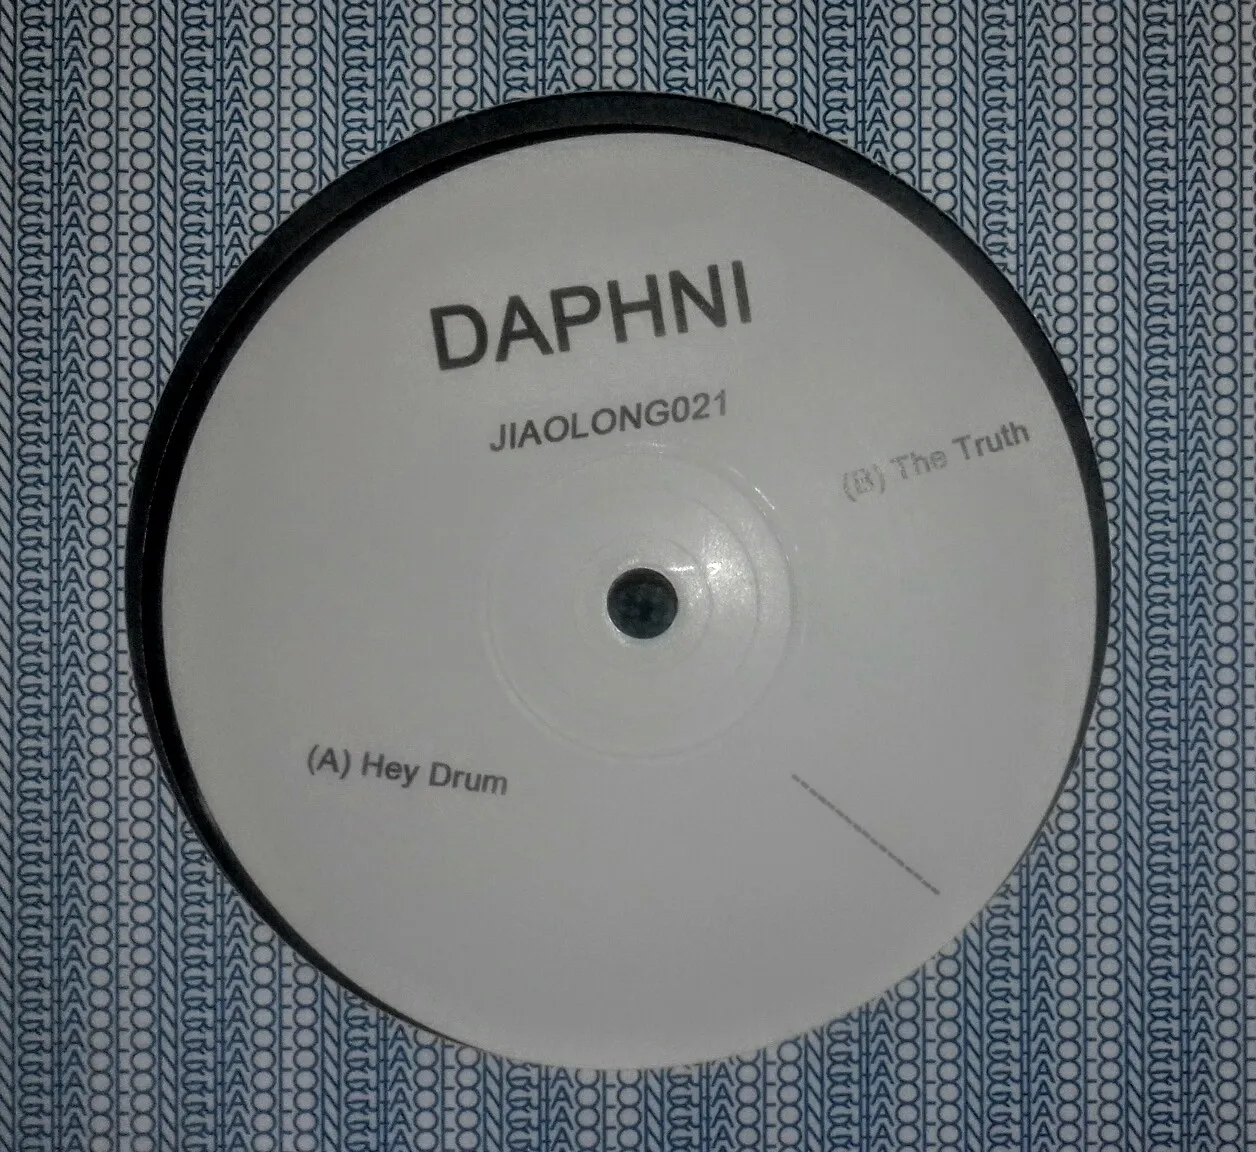 <strong>Daphni - Hey Drum / The Truth</strong> (Vinyl 12)